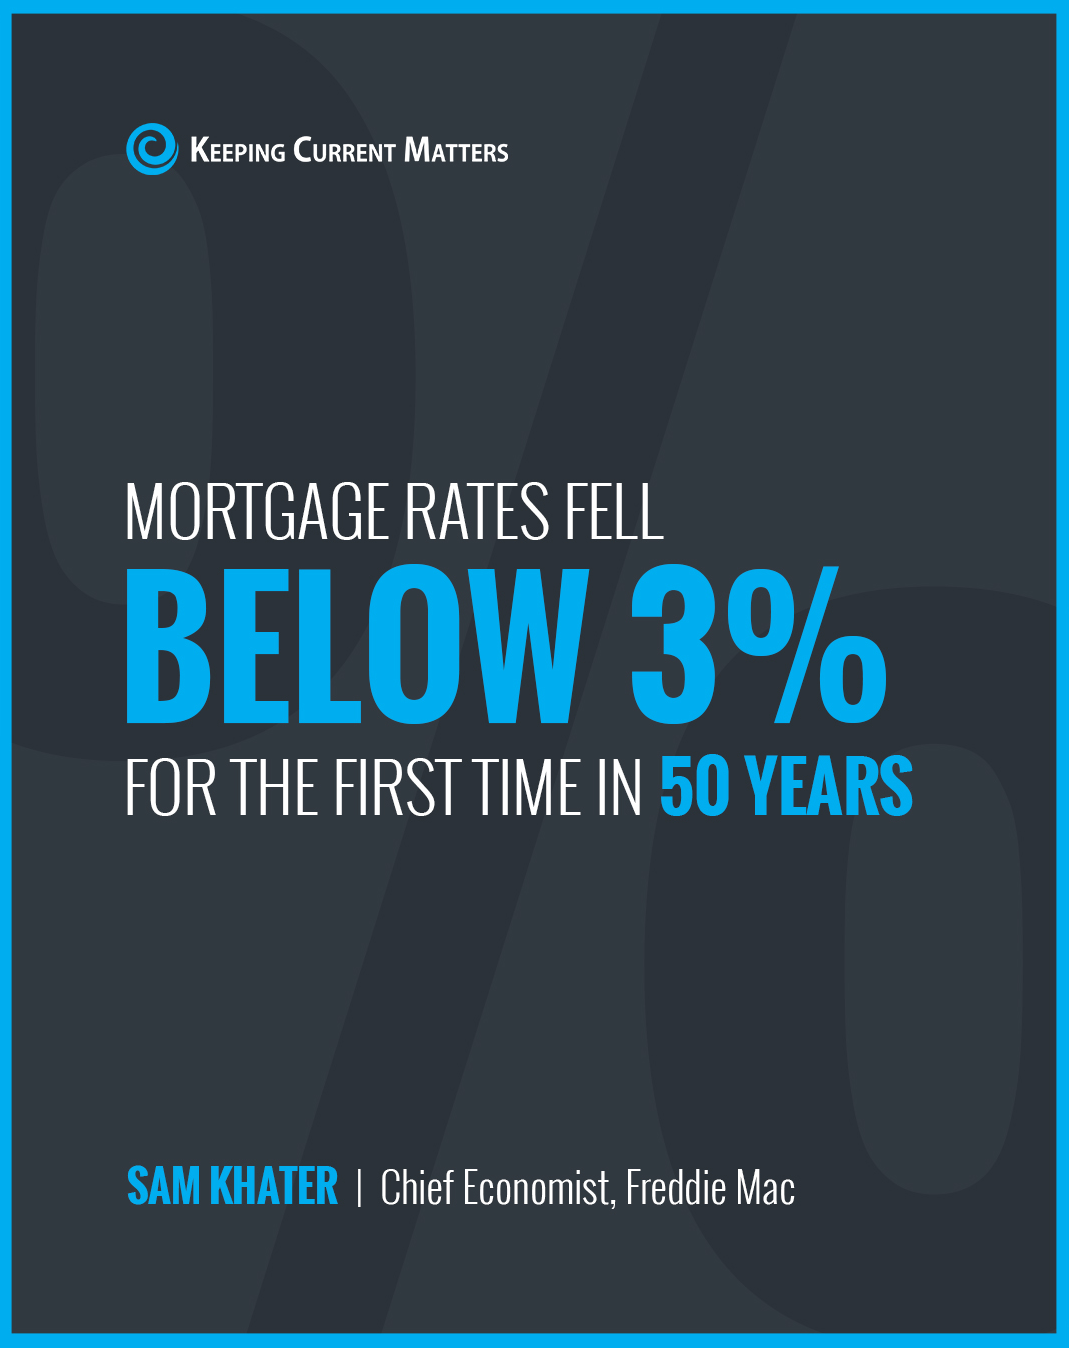 mortgage rates fall below 3% for first time in 50 years